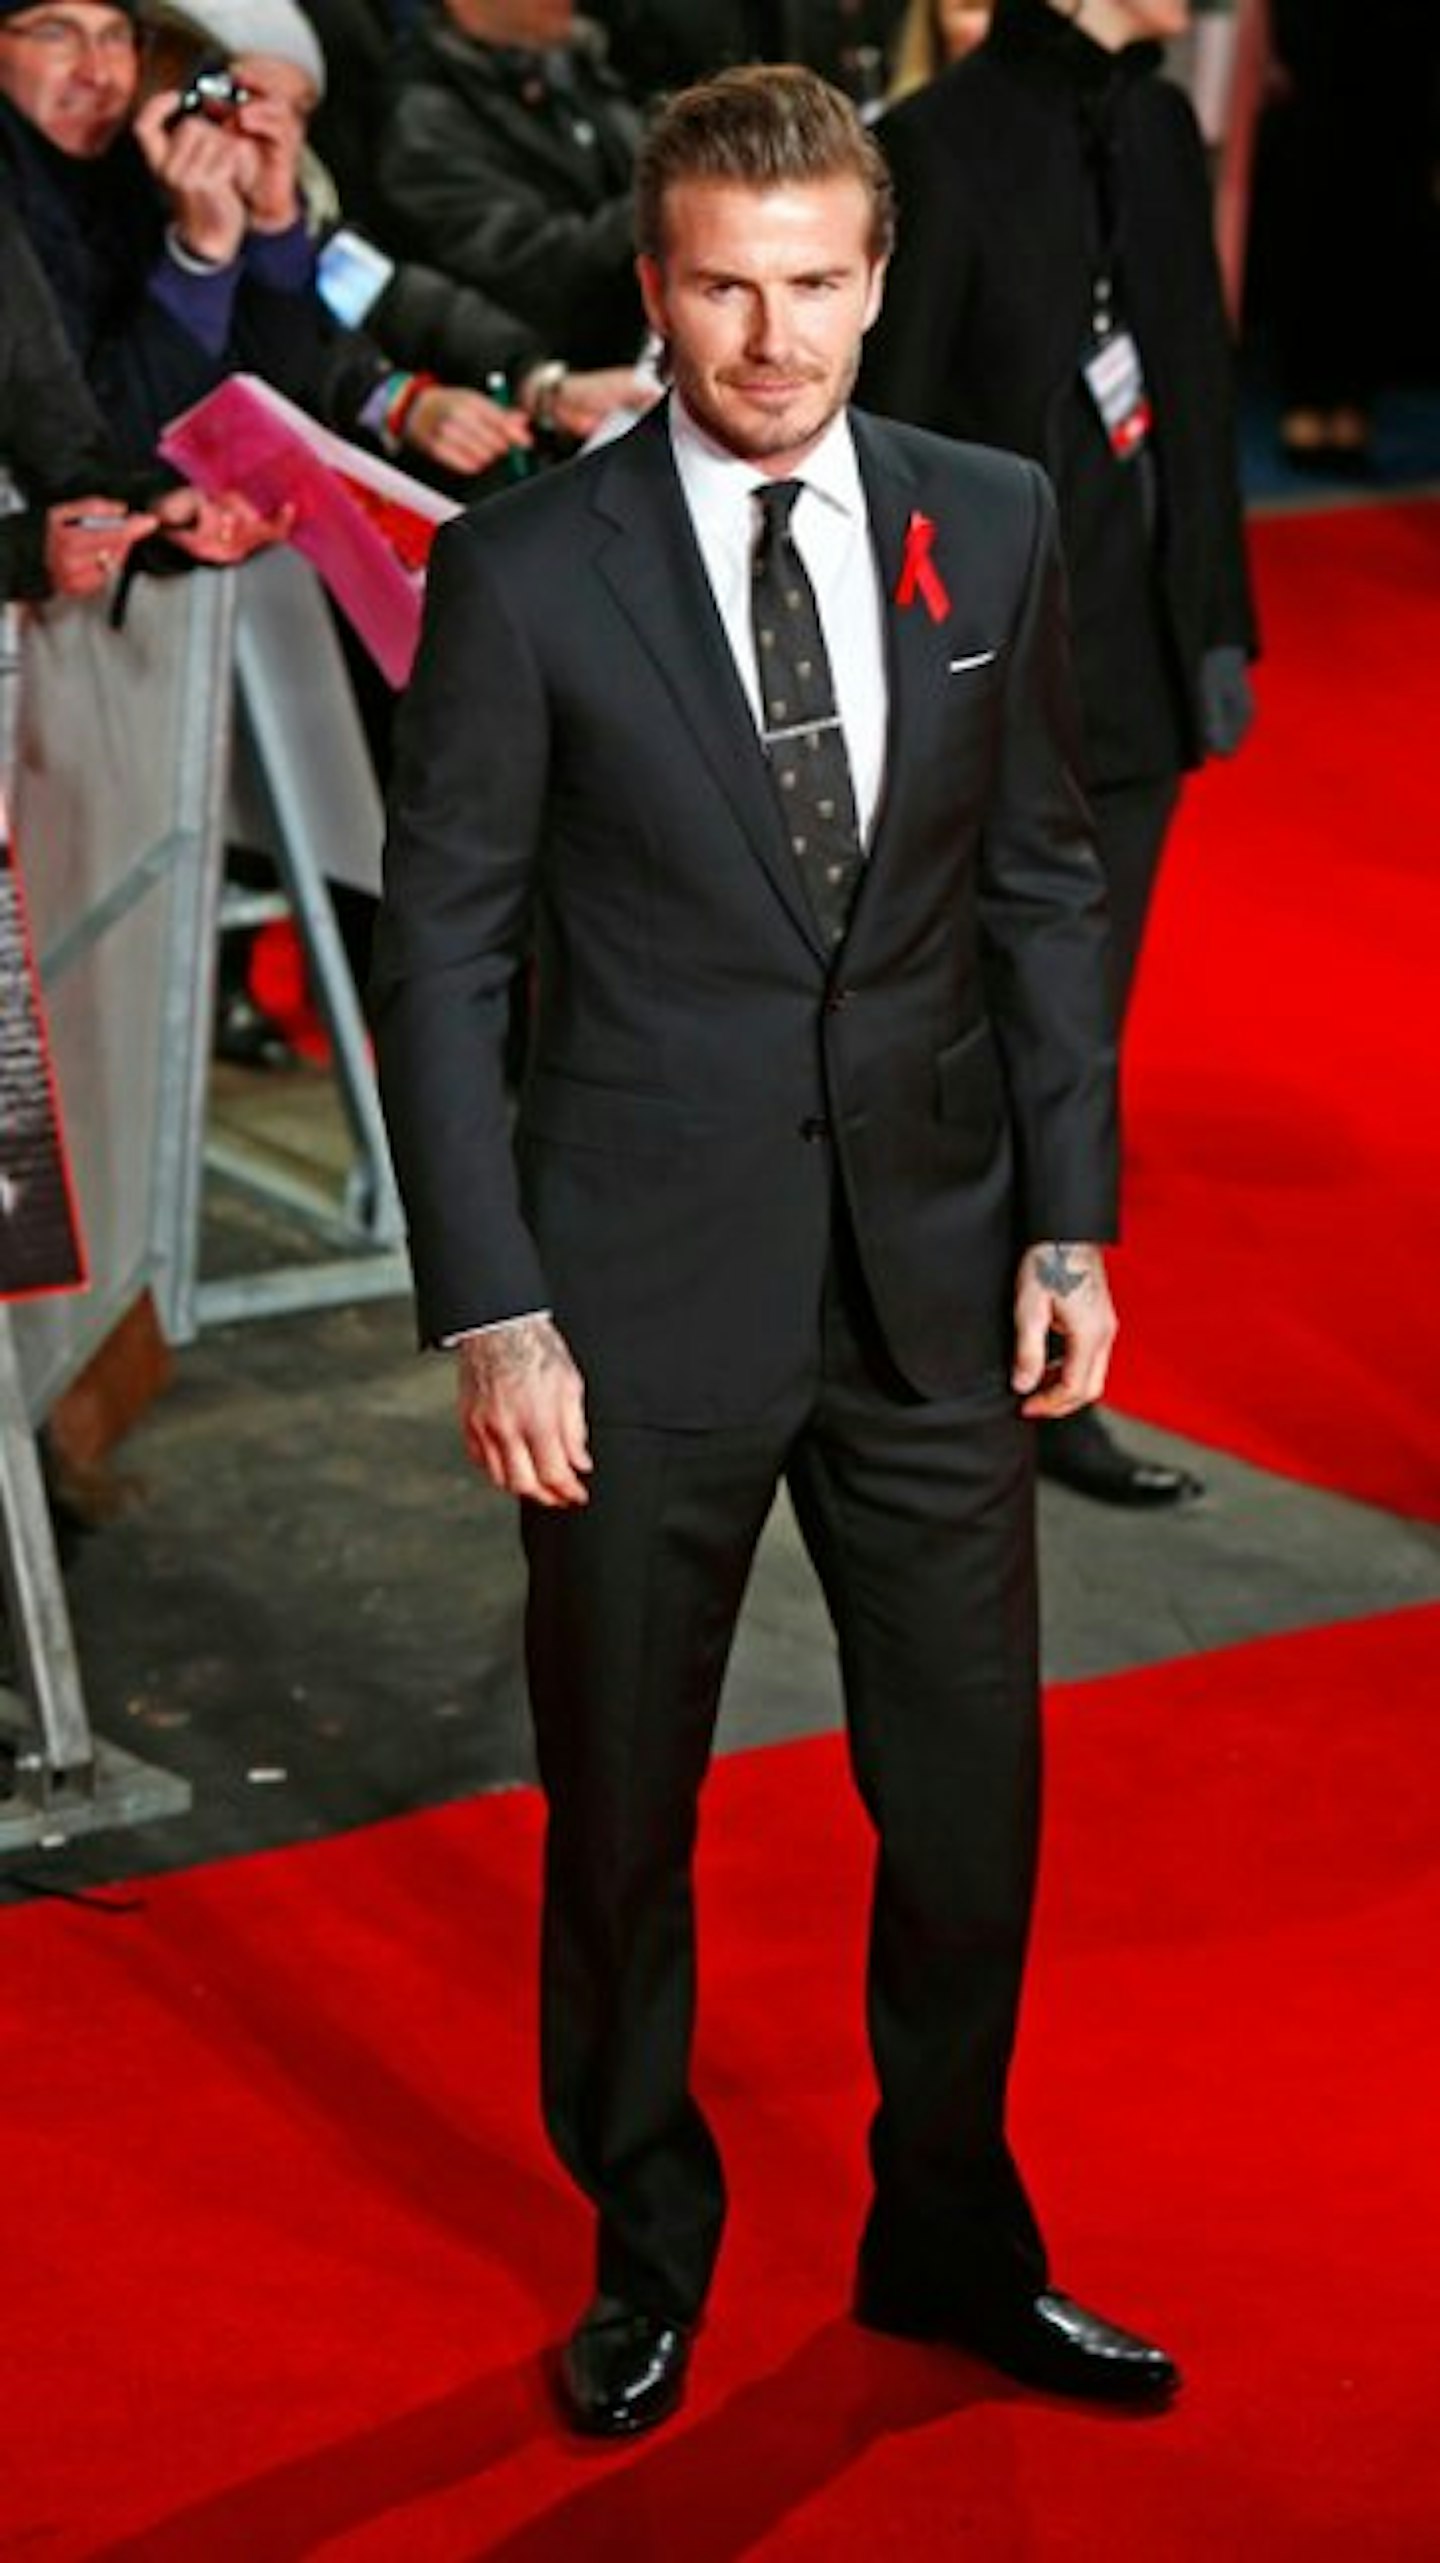 David was dressed in a dapper black suit and tie for last night's premiere